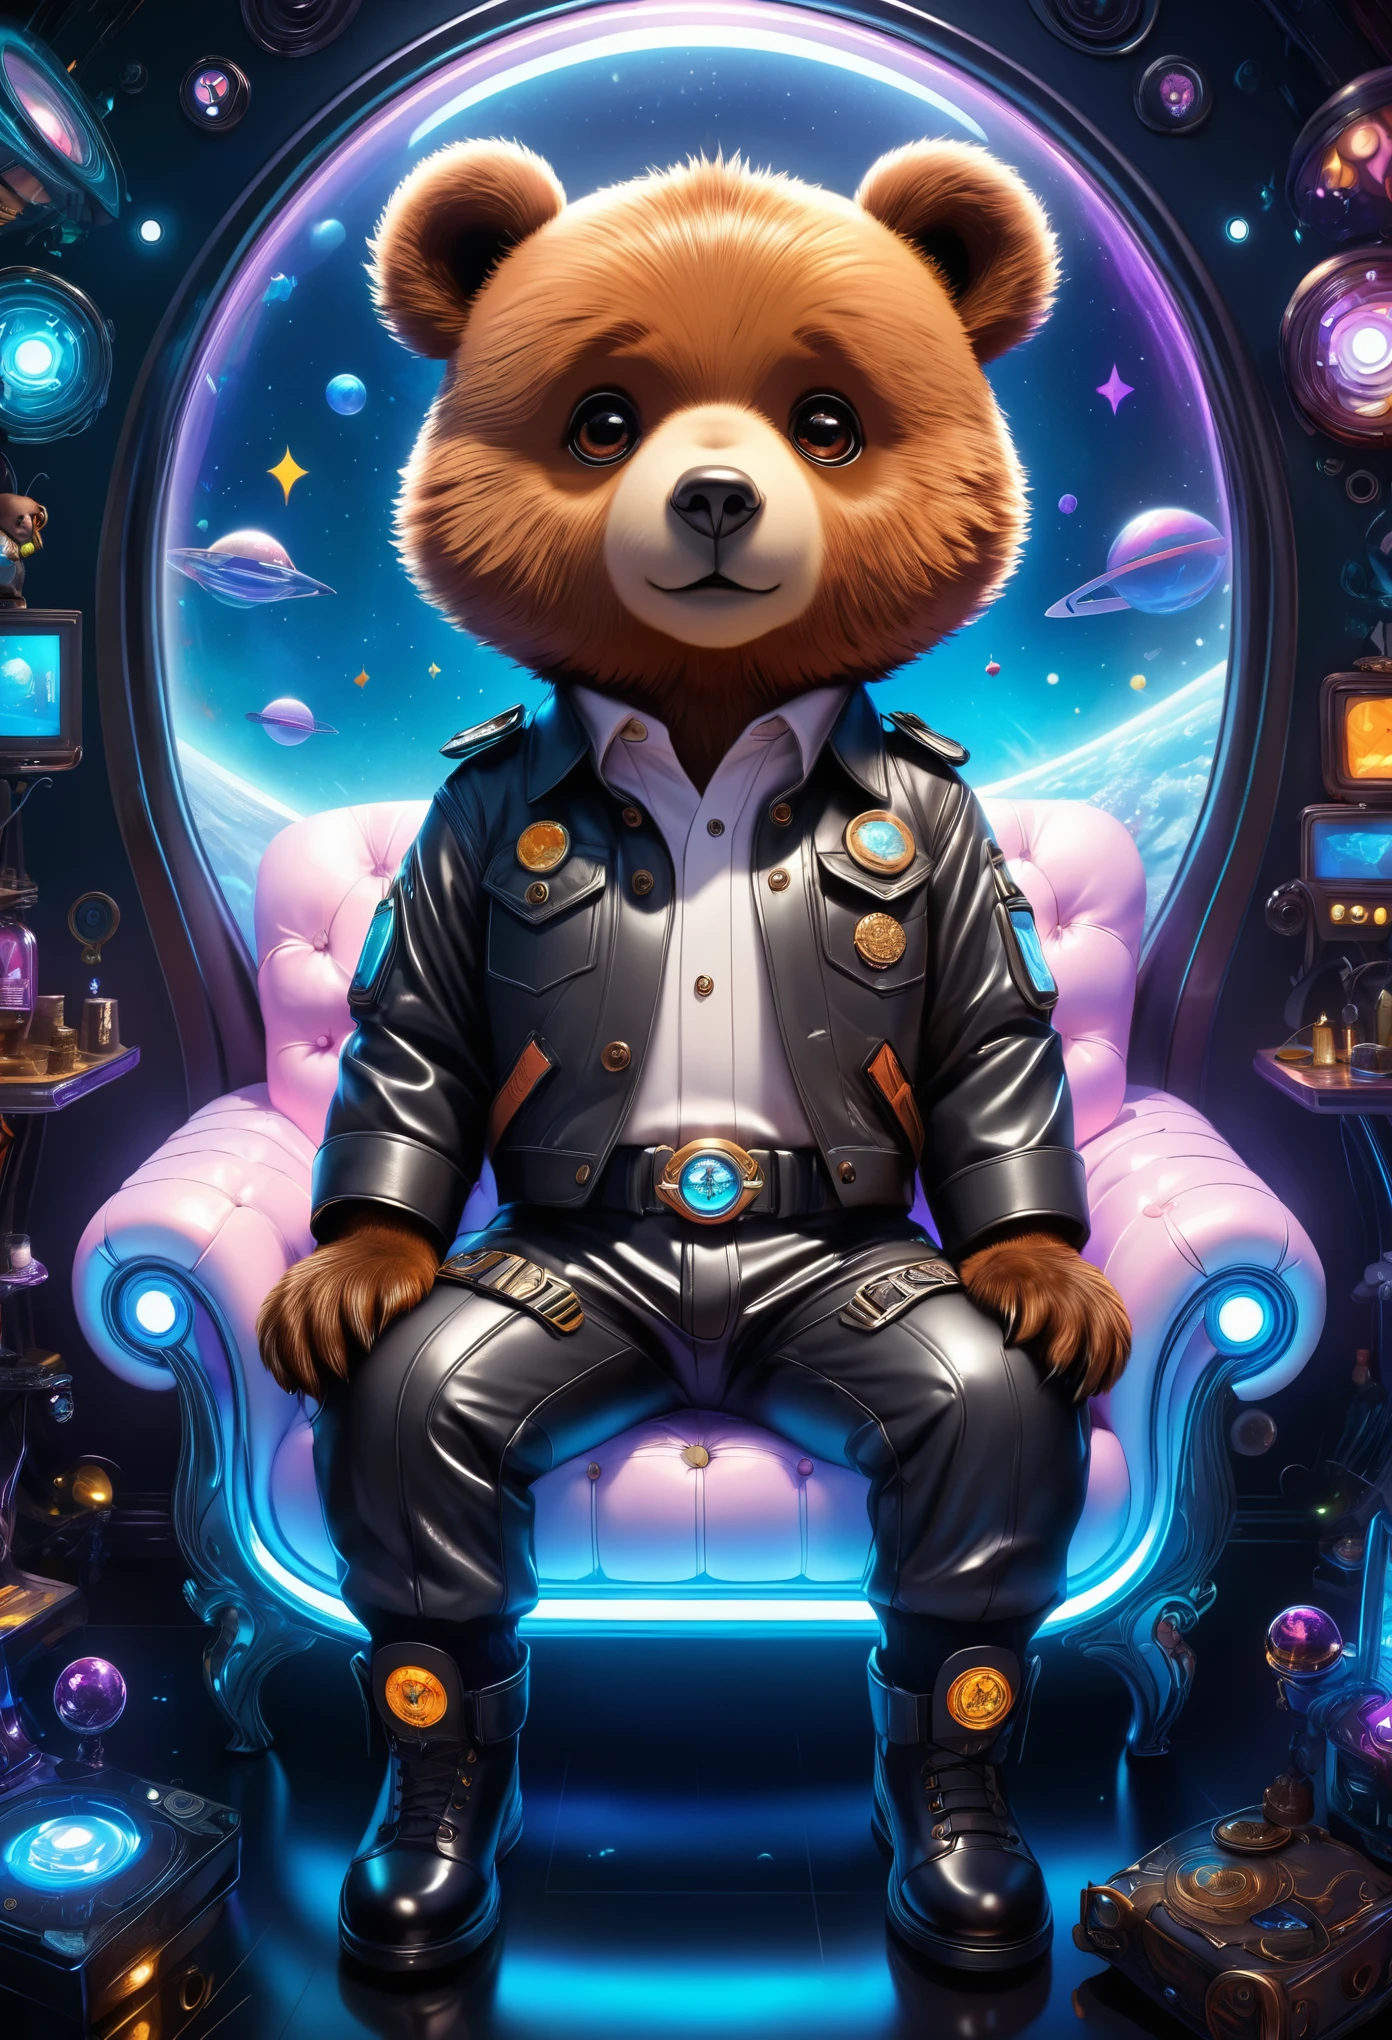 (Cute cartoon style:1.3), (((close-up of mighty bear God holding otherworldly planet))), (full sleek classic spacesuit:1.2), ((open head)), dark fur, epic space scenery, intricate design, bright colors, masterpiece in maximum 16K resolution, best quality, ultra detailed, aesthetics, absurdes.